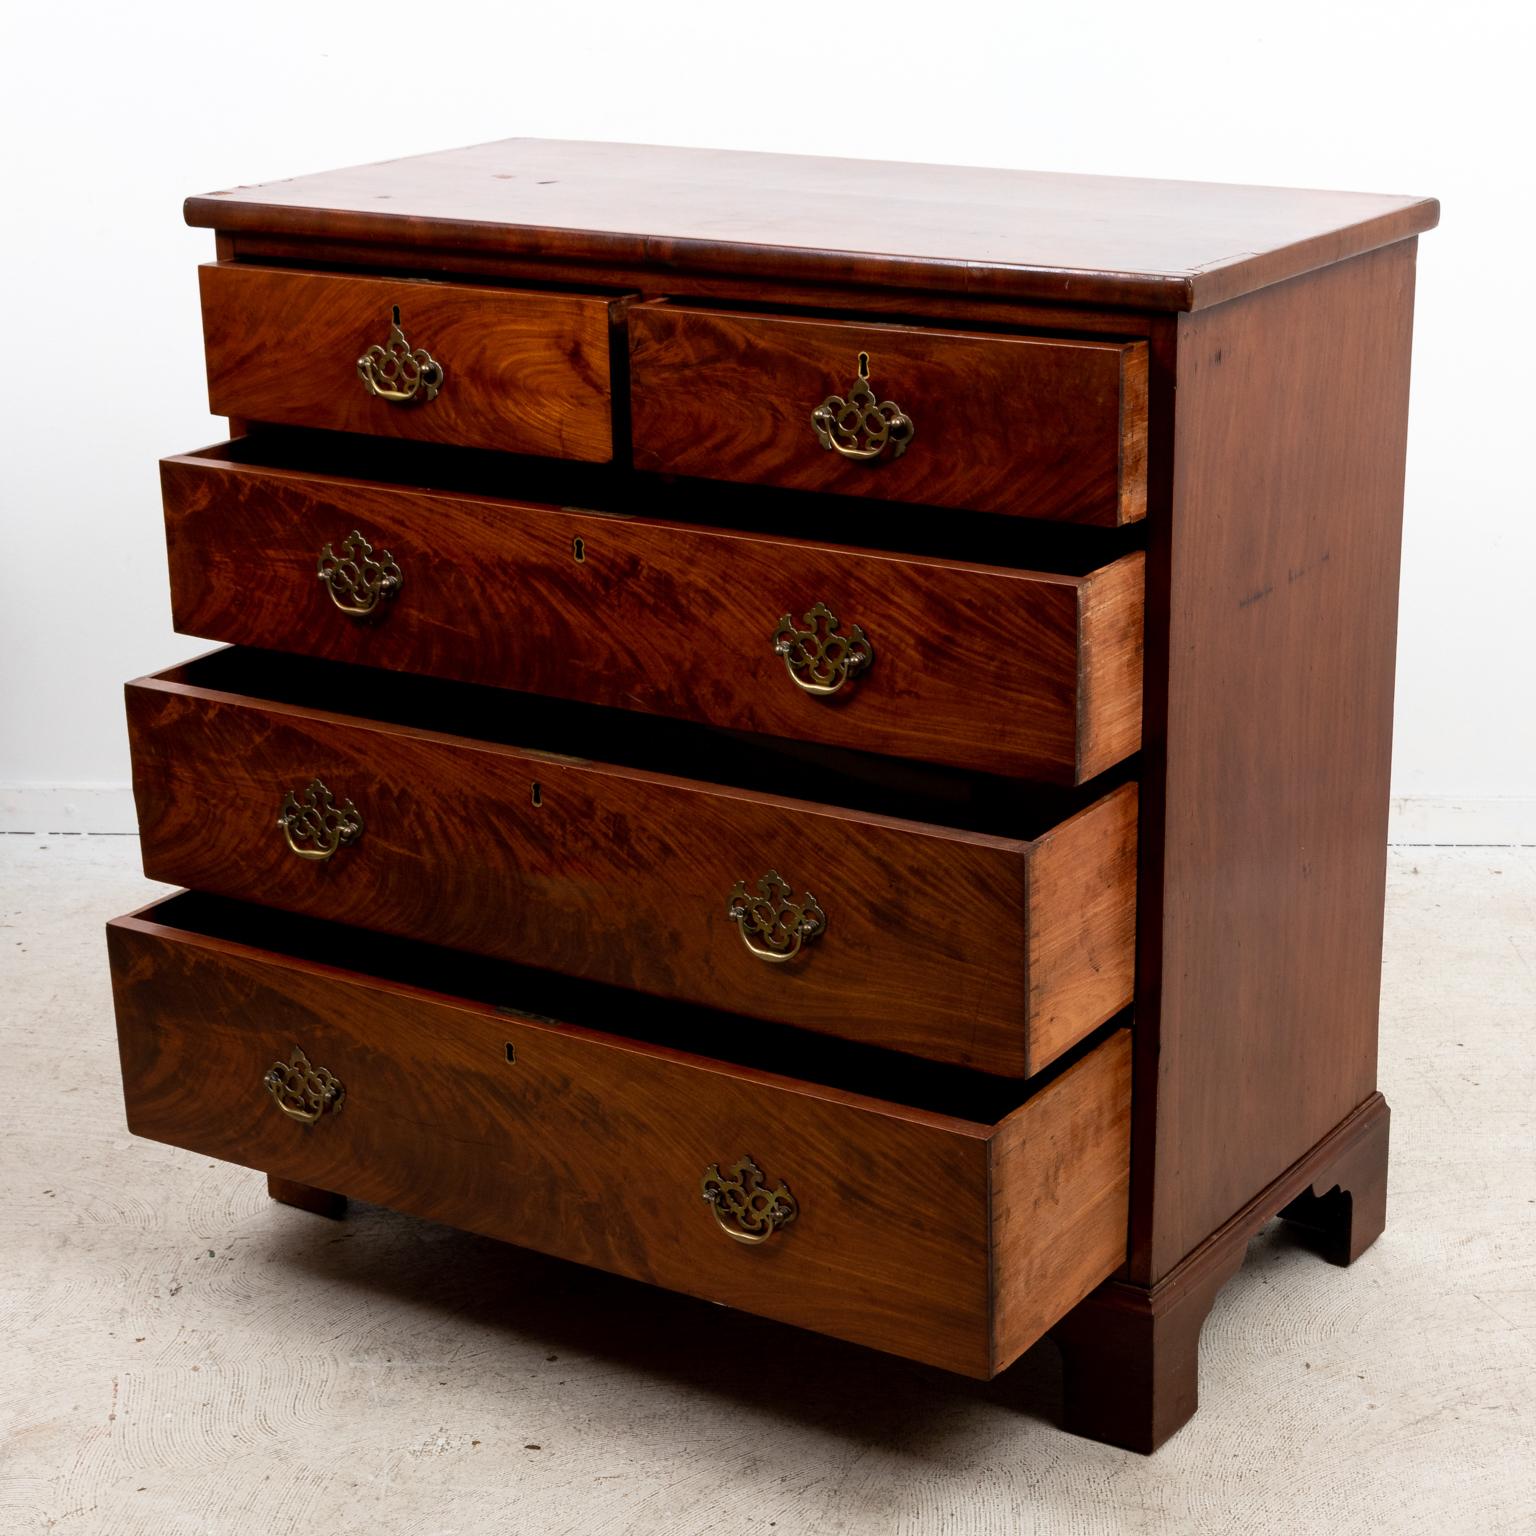 Circa mid-19th century Georgian mahogany chest of drawers with bat's wing escutcheon on ogee bracket feet. The piece comes with two small drawers over three larger drawers. Please note of wear consistent with age and fair condition including finish